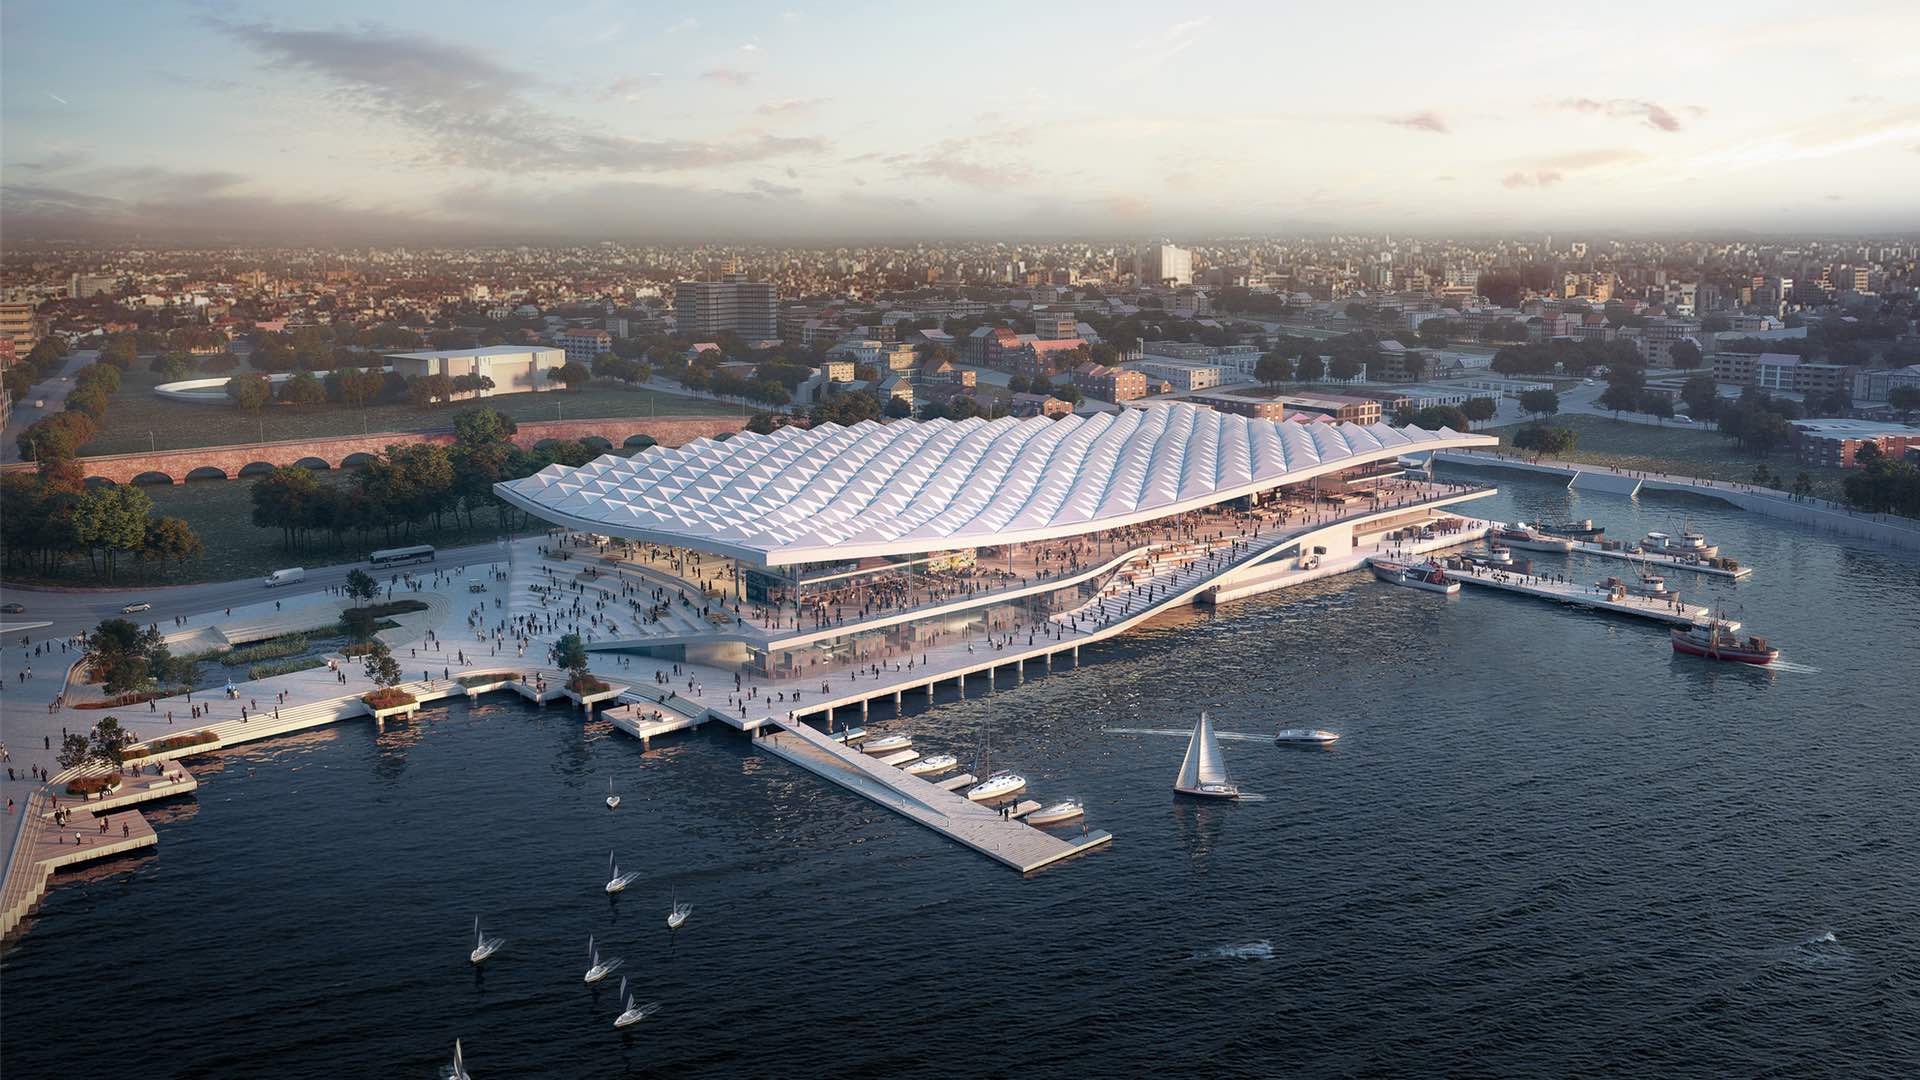 This Is What the Huge New Sydney Fish Market Will Look Like in 2023